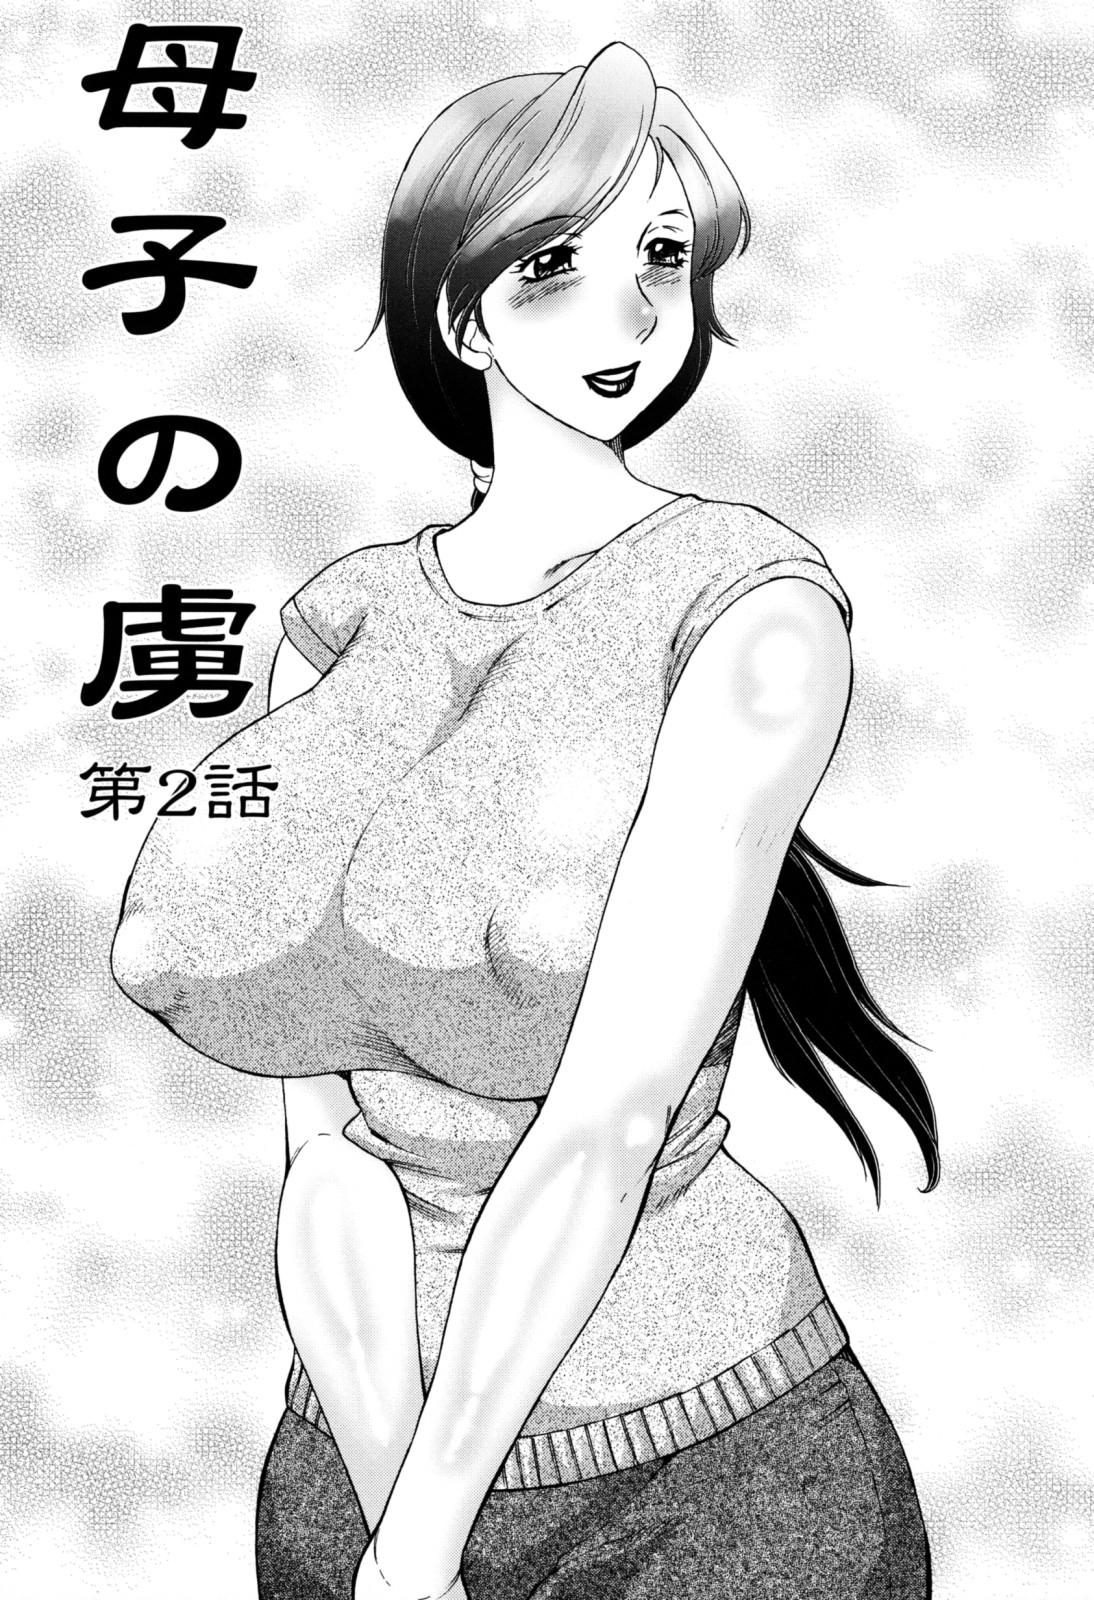 Boshino Toriko - The Captive of Mother and the Son 24